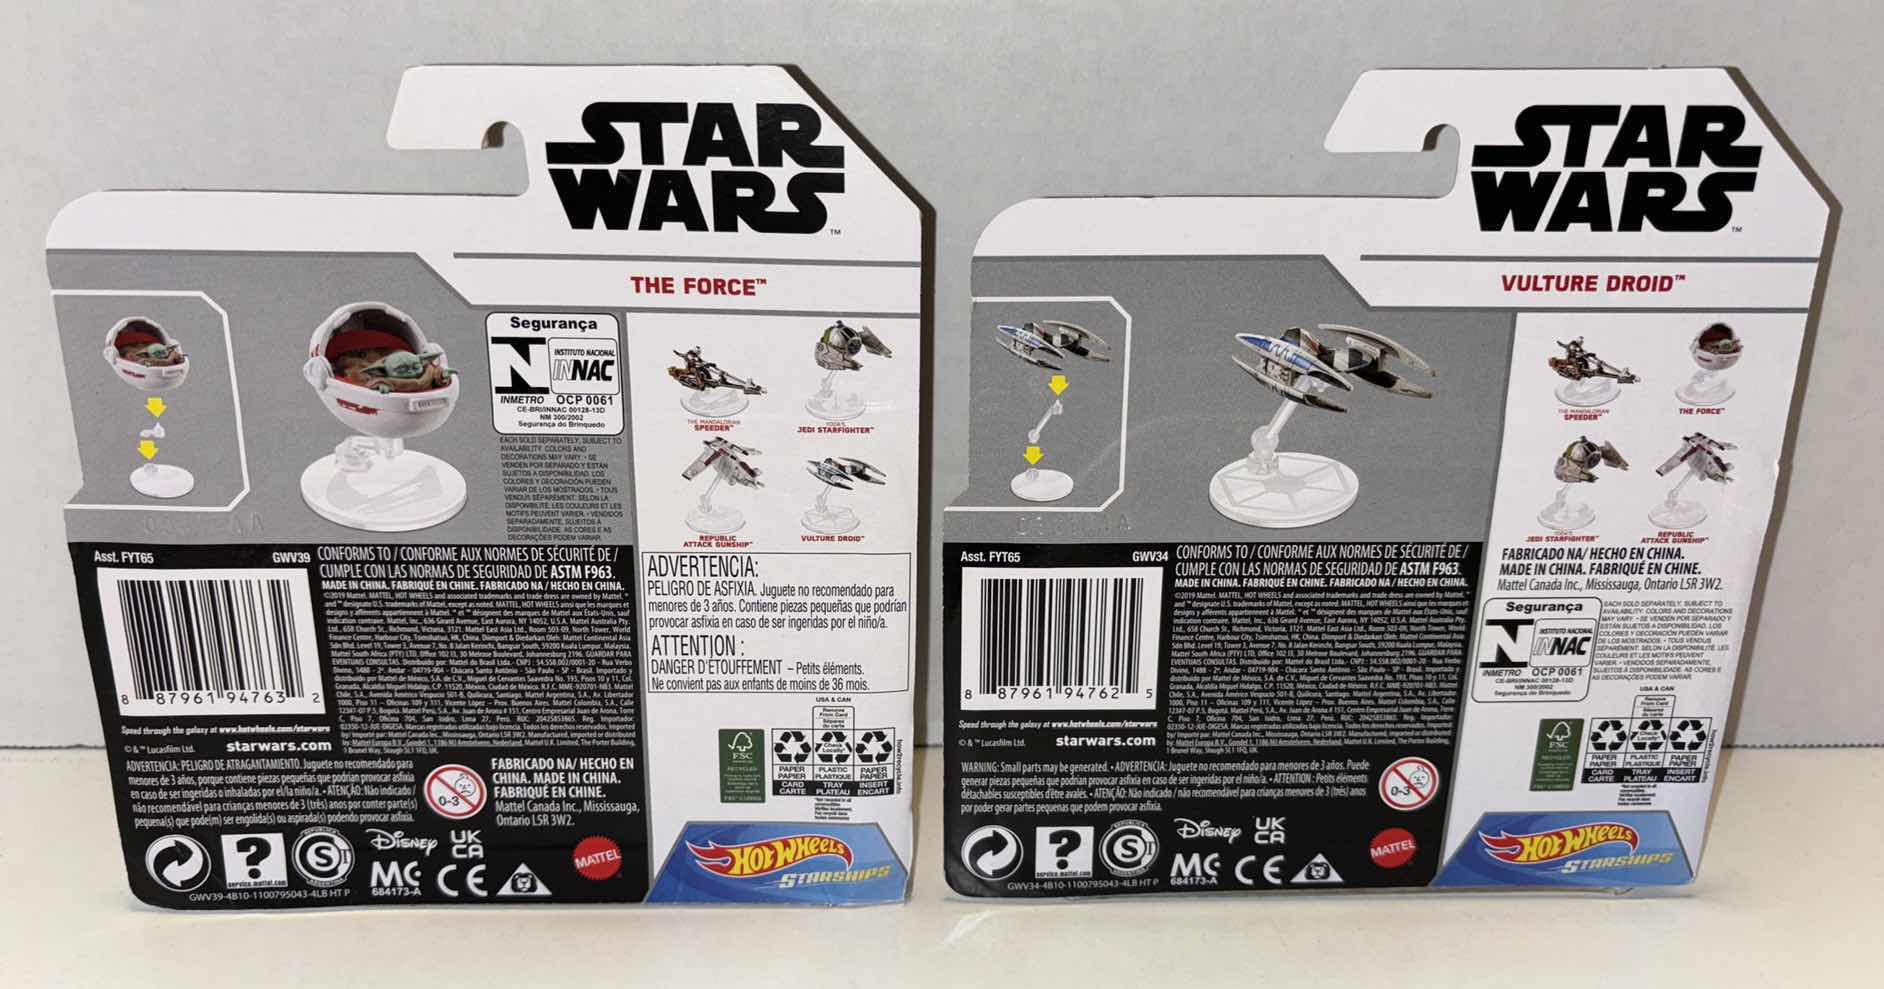 Photo 4 of NEW 2-PACK MATTEL HOT WHEELS STAR WARS STARSHIPS DIE-CAST VEHICLE, THE MANDALORIAN “THE CHILD HOVER PRAM” & “VULTURE DROID”